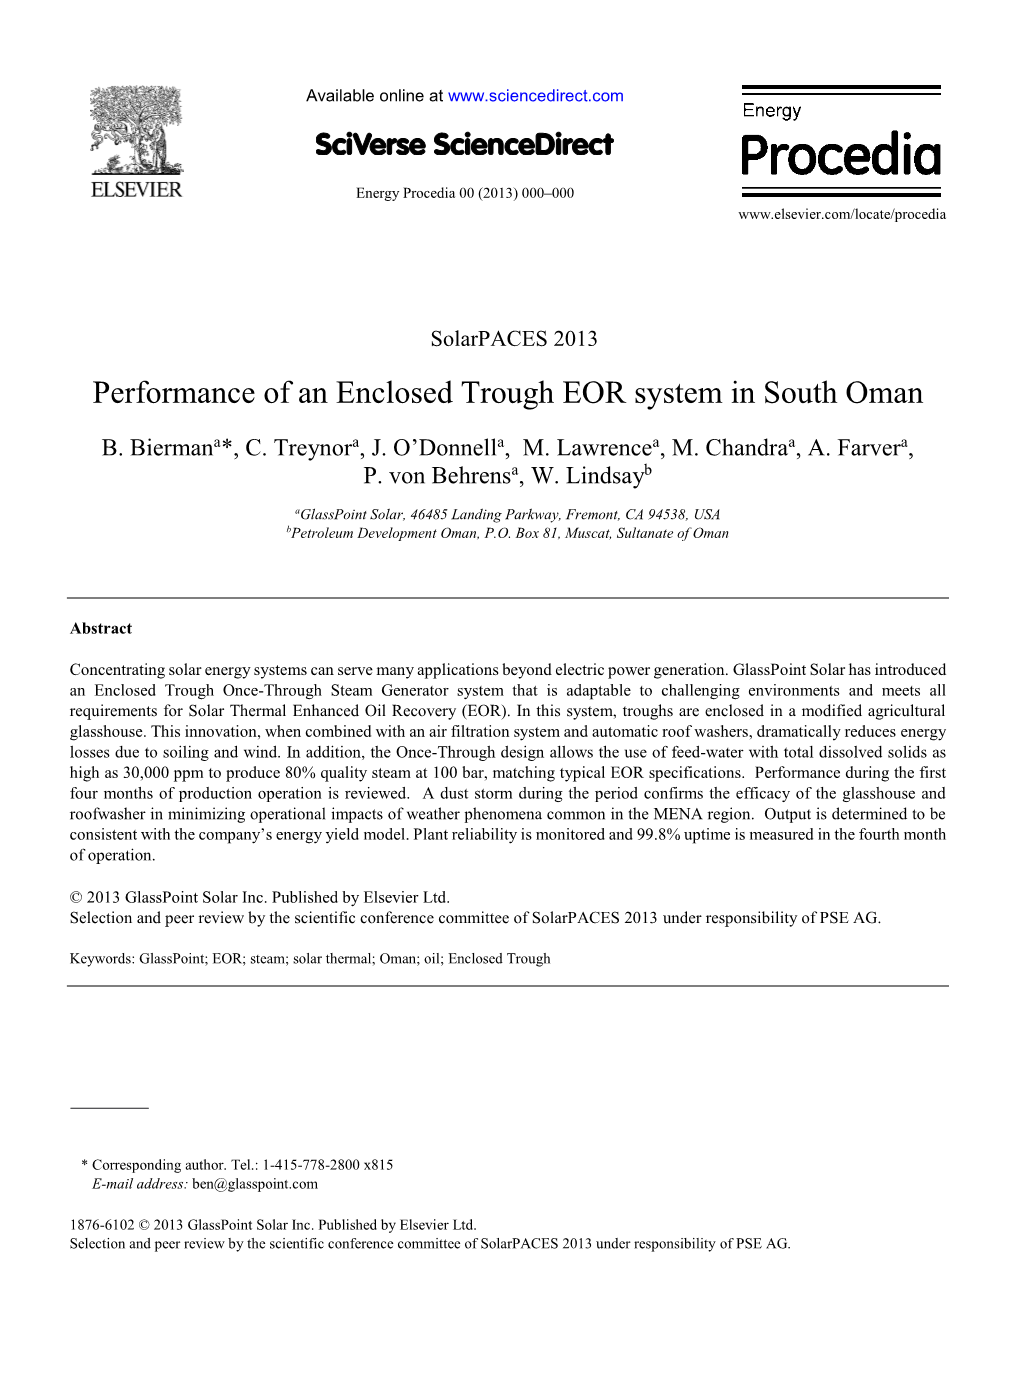 Performance of an Enclosed Trough EOR System in South Oman